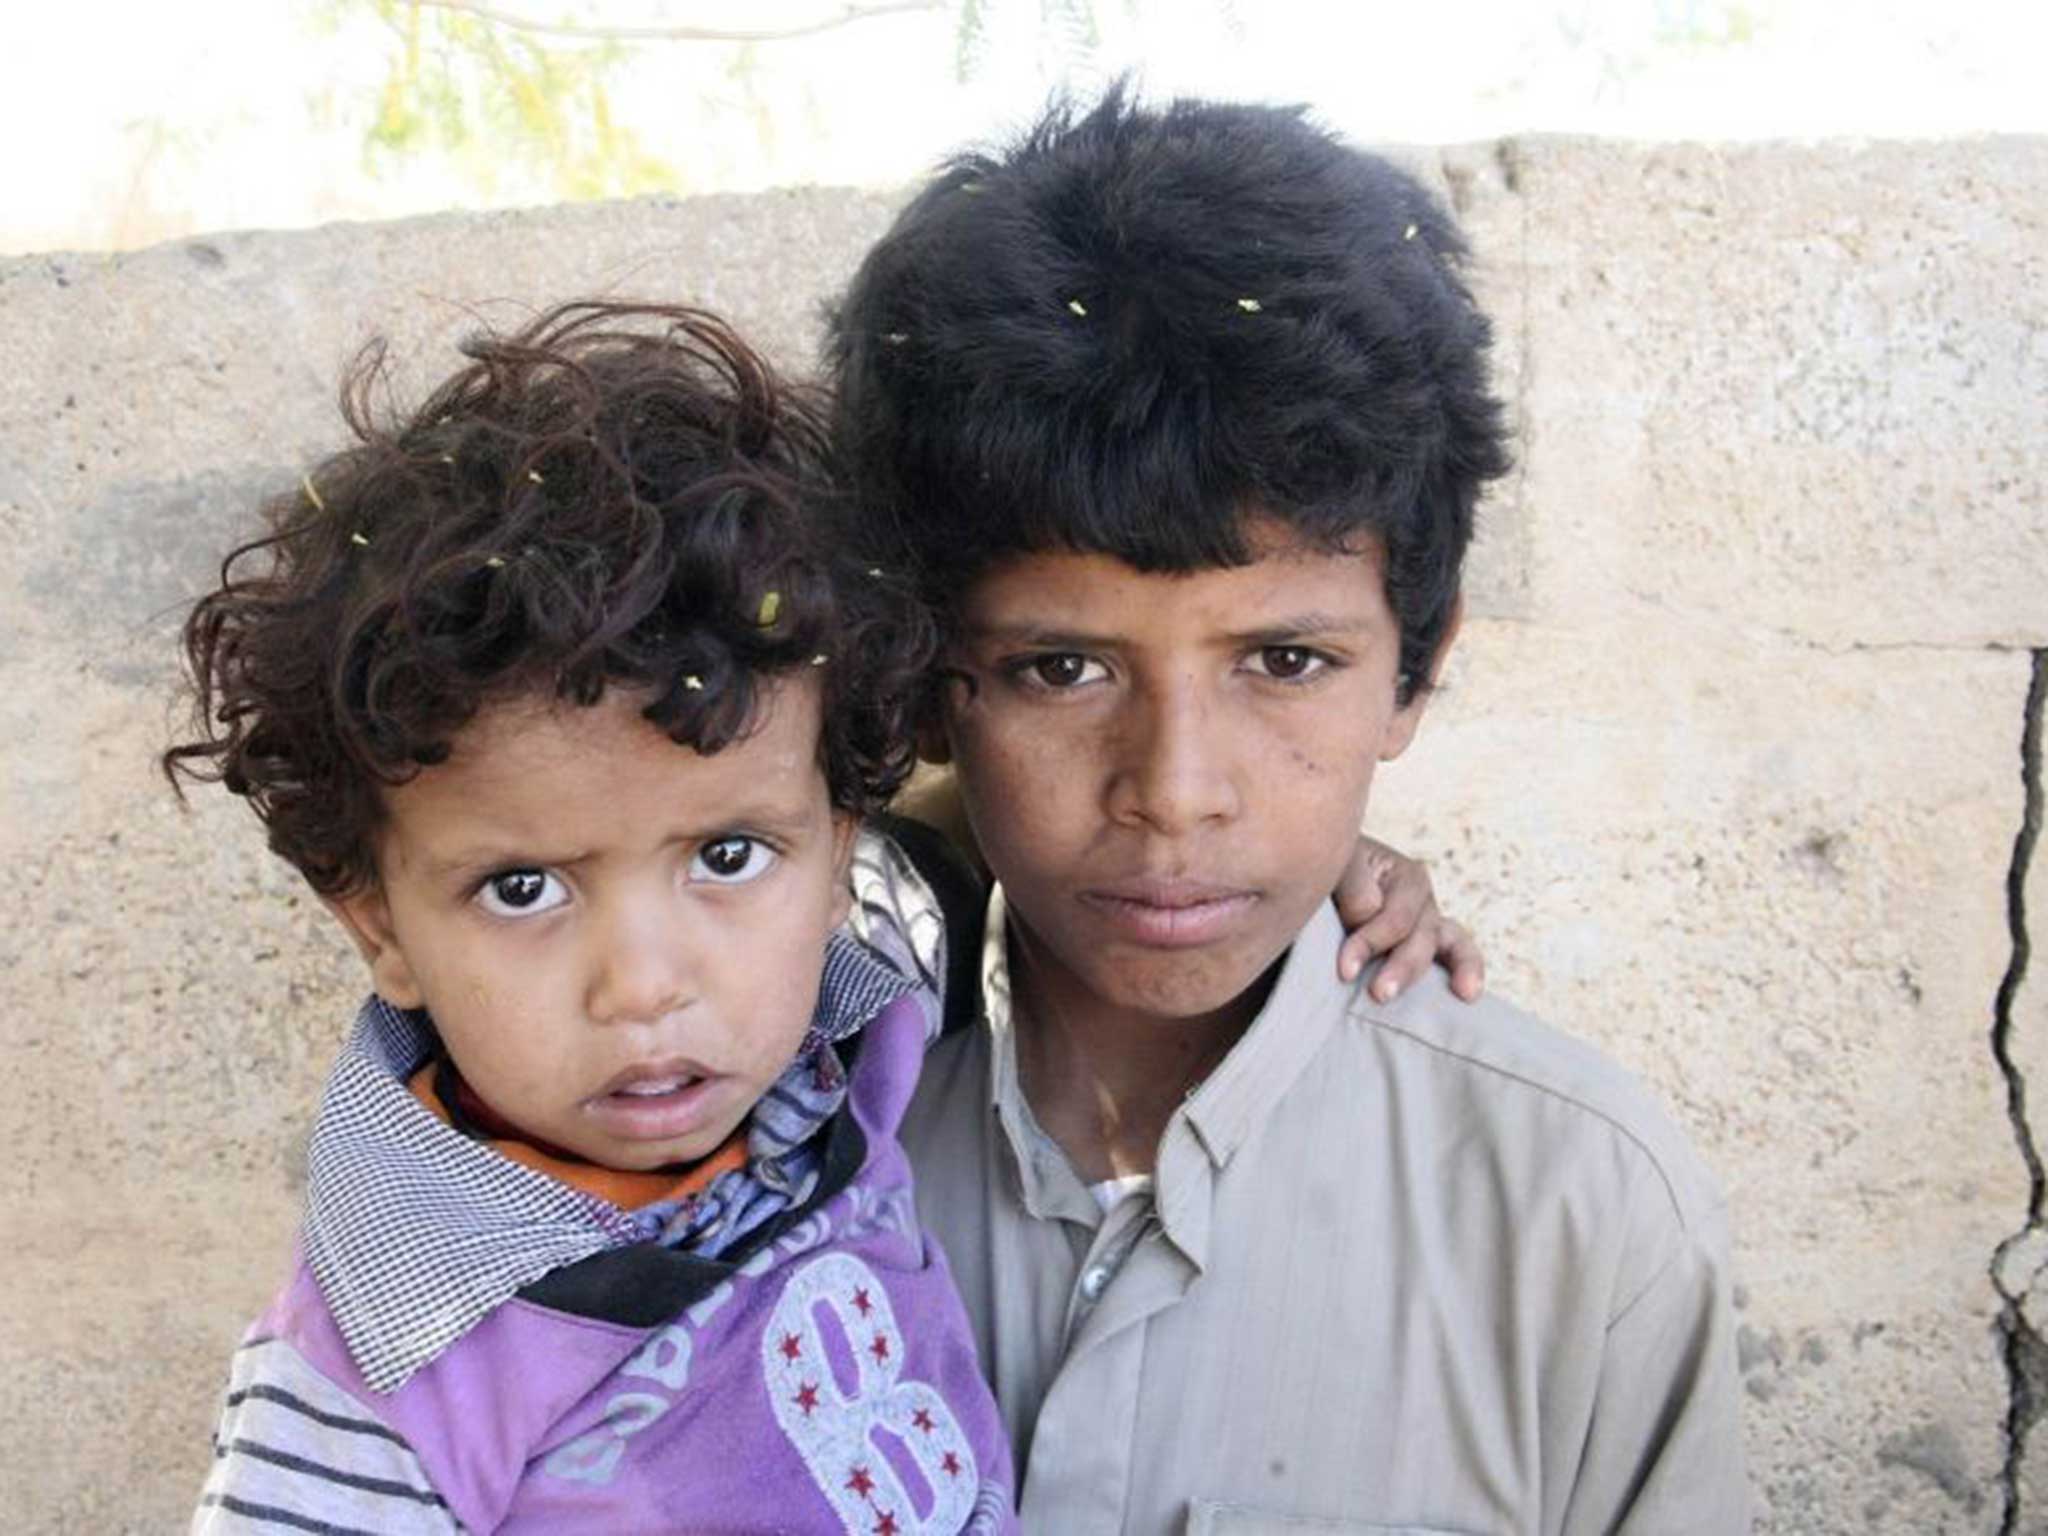 Mohammed Saleh Taeiman (R) poses for a photo with his younger brother outside their family's house in Marib province in 2013